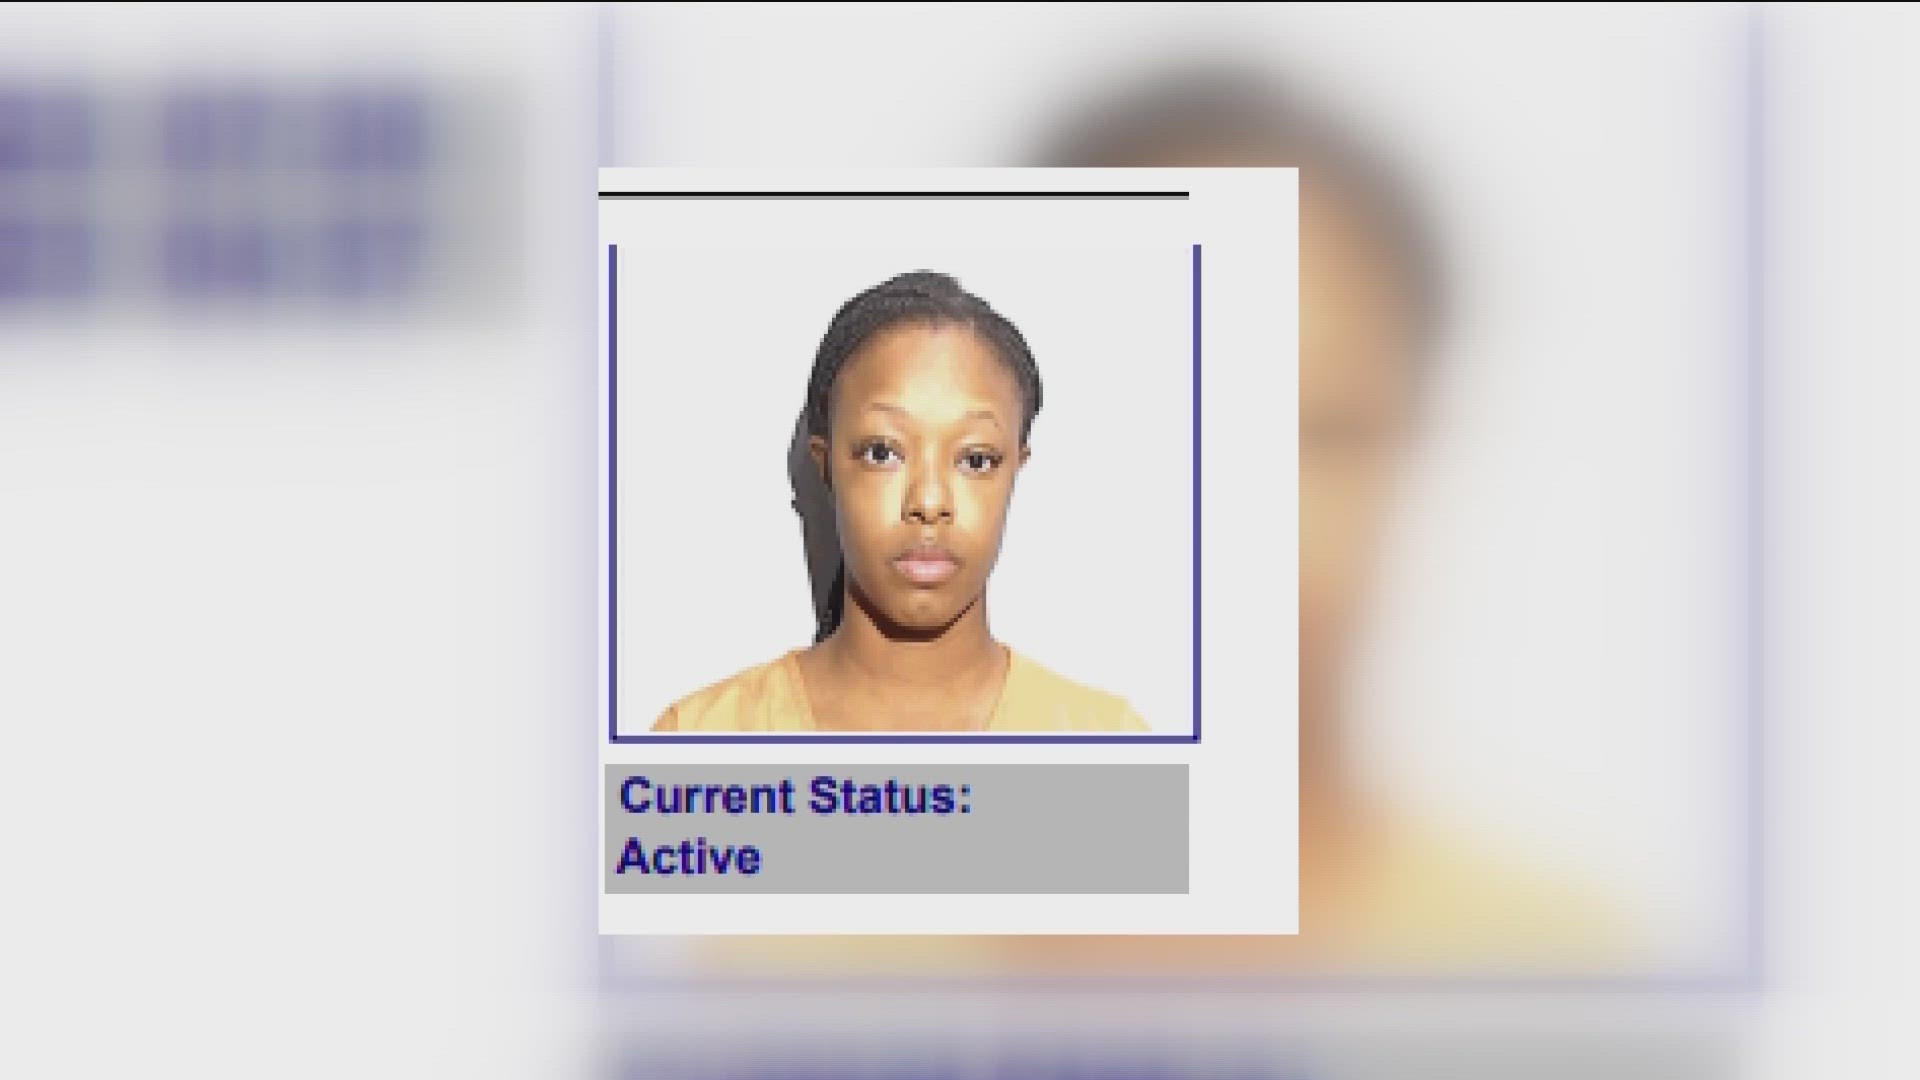 Police arrested 33-year-old Shekiyah Wilson and charged her with felonious assault after she allegedly shot a man early Friday.